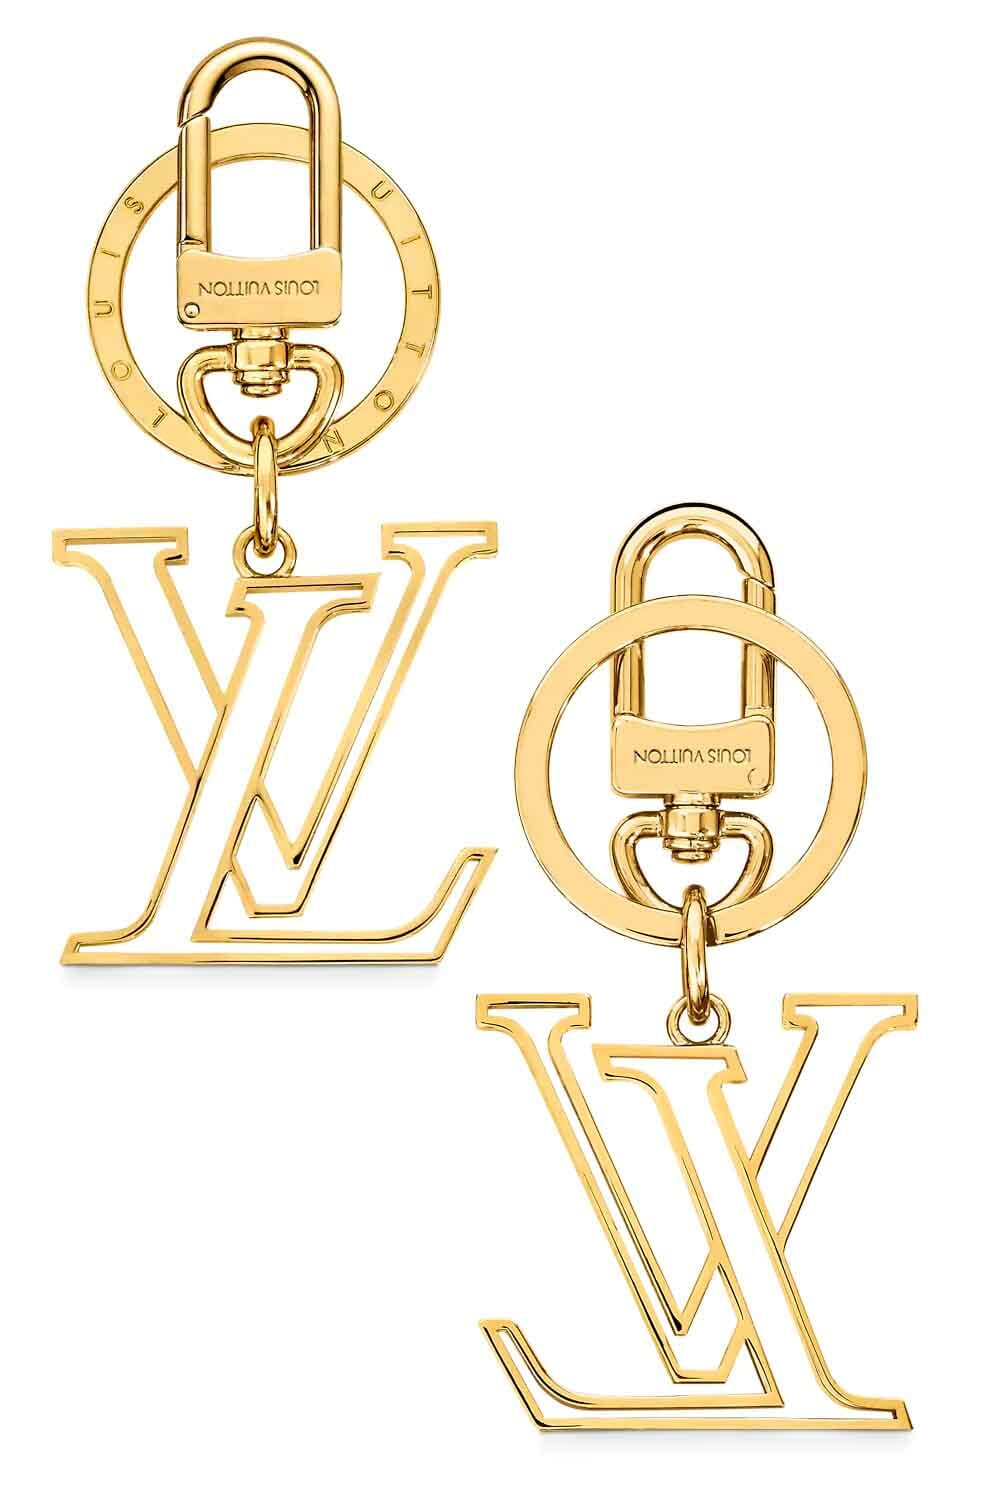 The-best-luxury-gifts-for-her-women-Louis-Vuitton-millionaire-bag-charm-key-holder